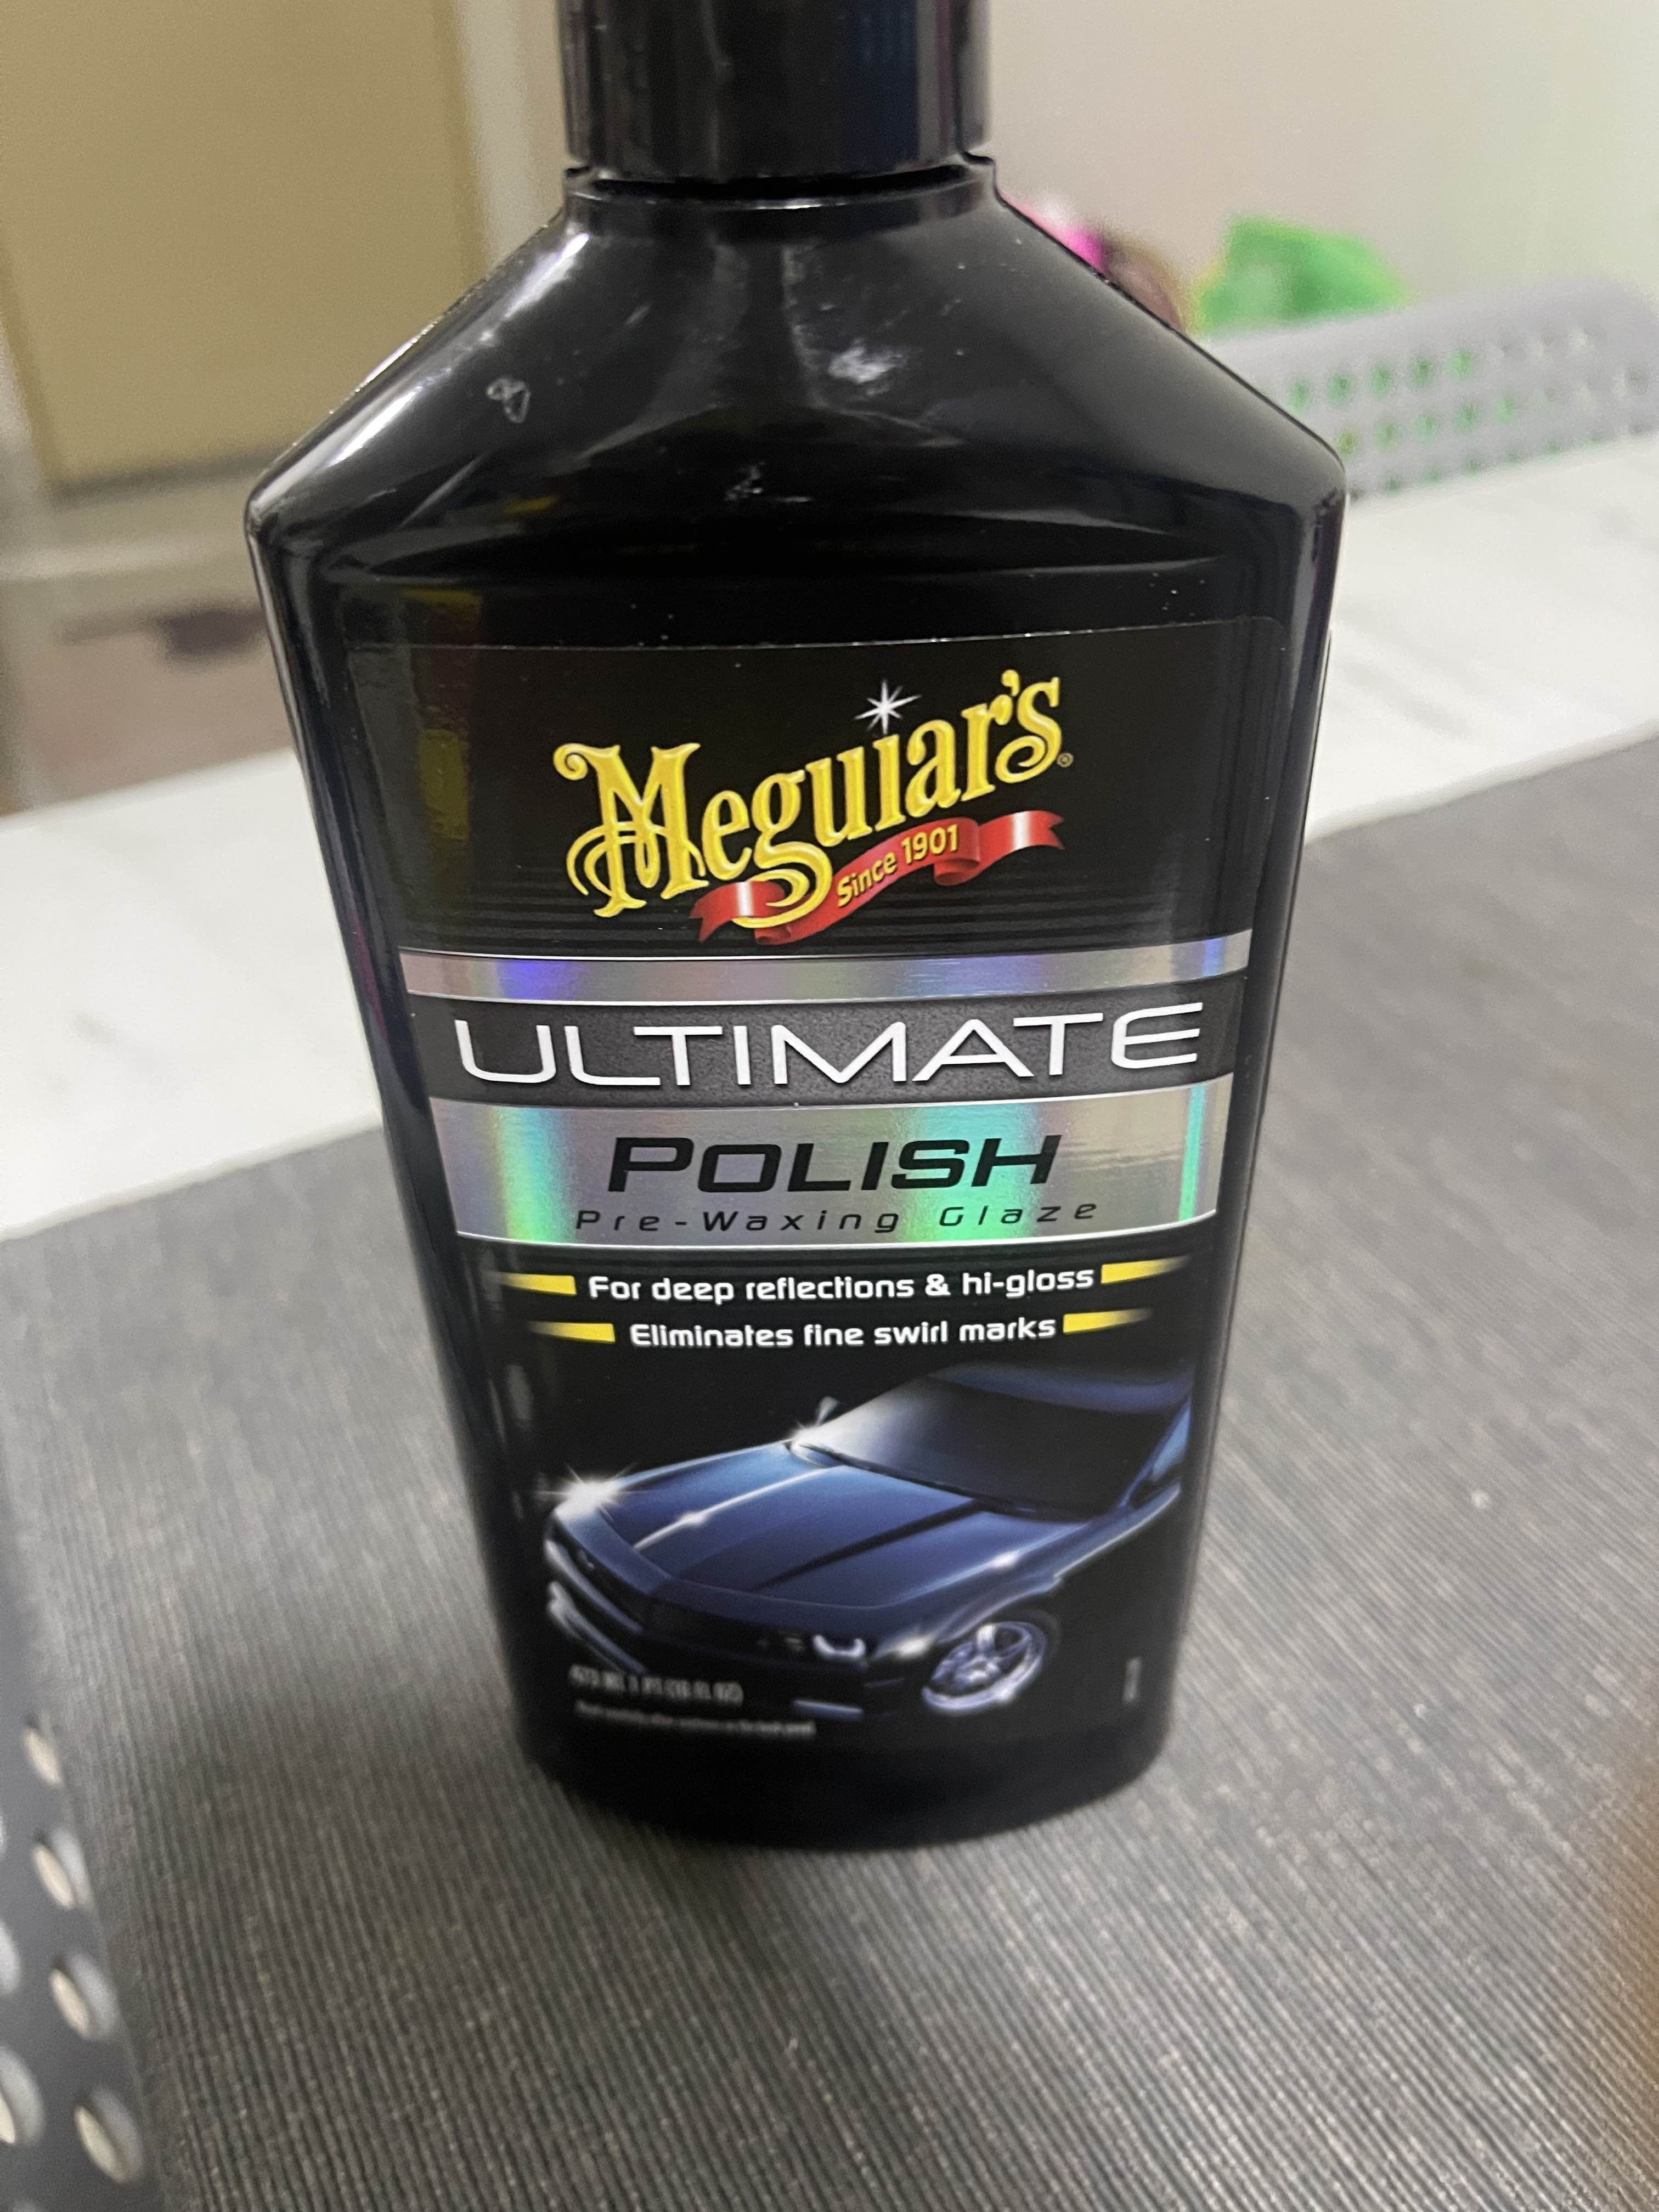 Meguiar's Malaysia on Instagram: Meguiar's Ultimate Polish is the final  step before waxing for maximum gloss and reflectivity. Rich polishing oils  add a deep, rich, wet look to paint especially on dark